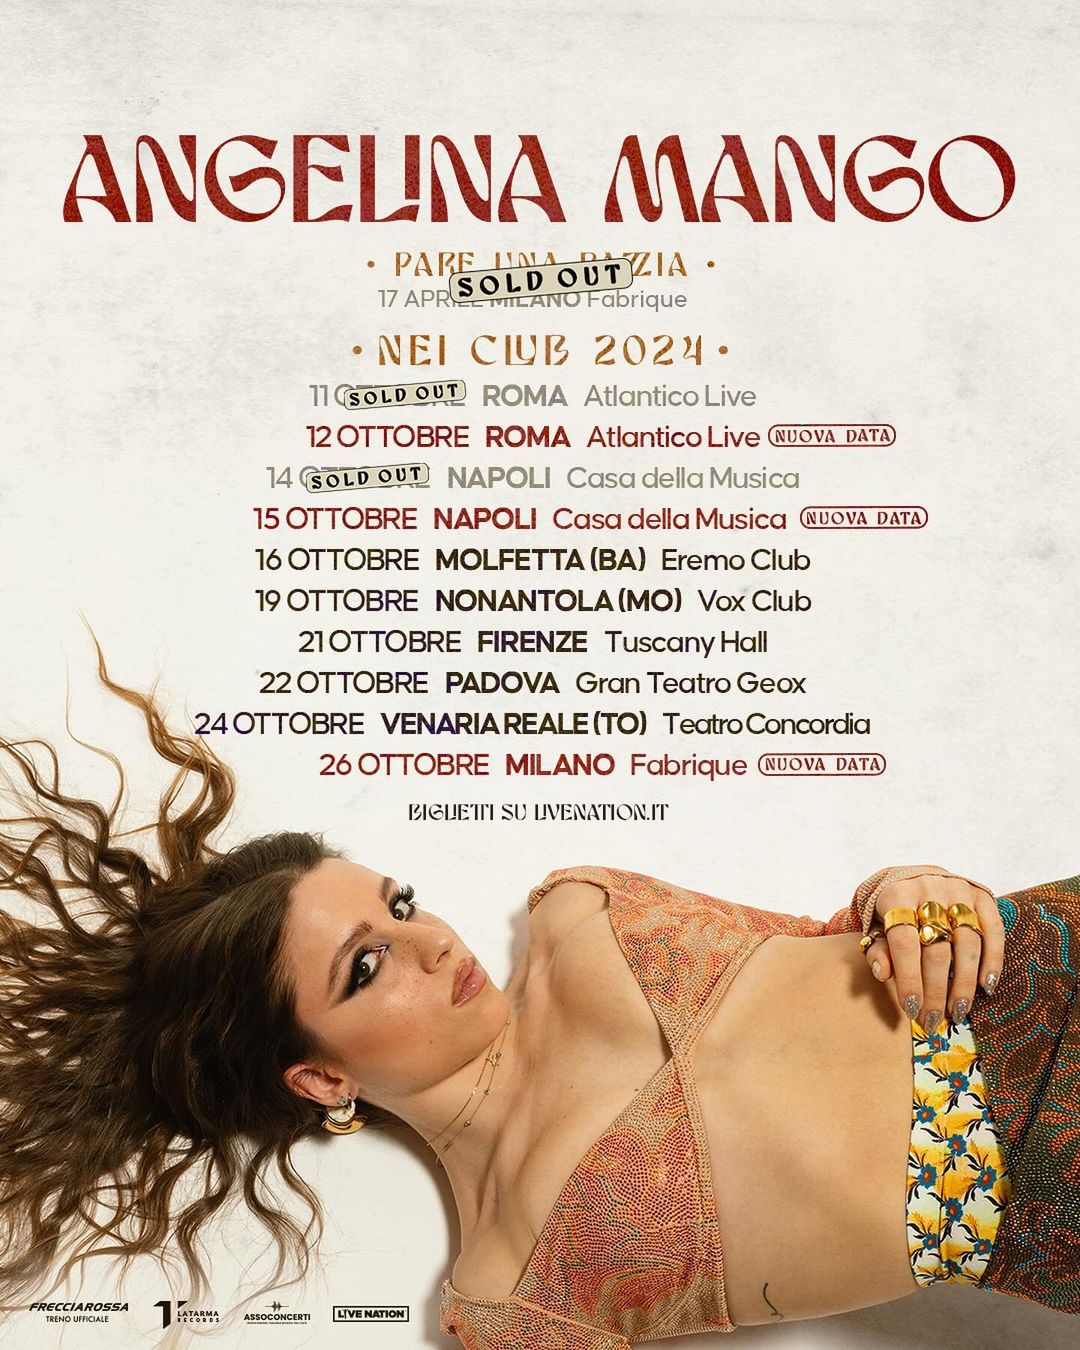 “LA NOIA” wins the GOLD RECORD and ANGELINA MANGO NEI CLUB 2024 tour sells out!